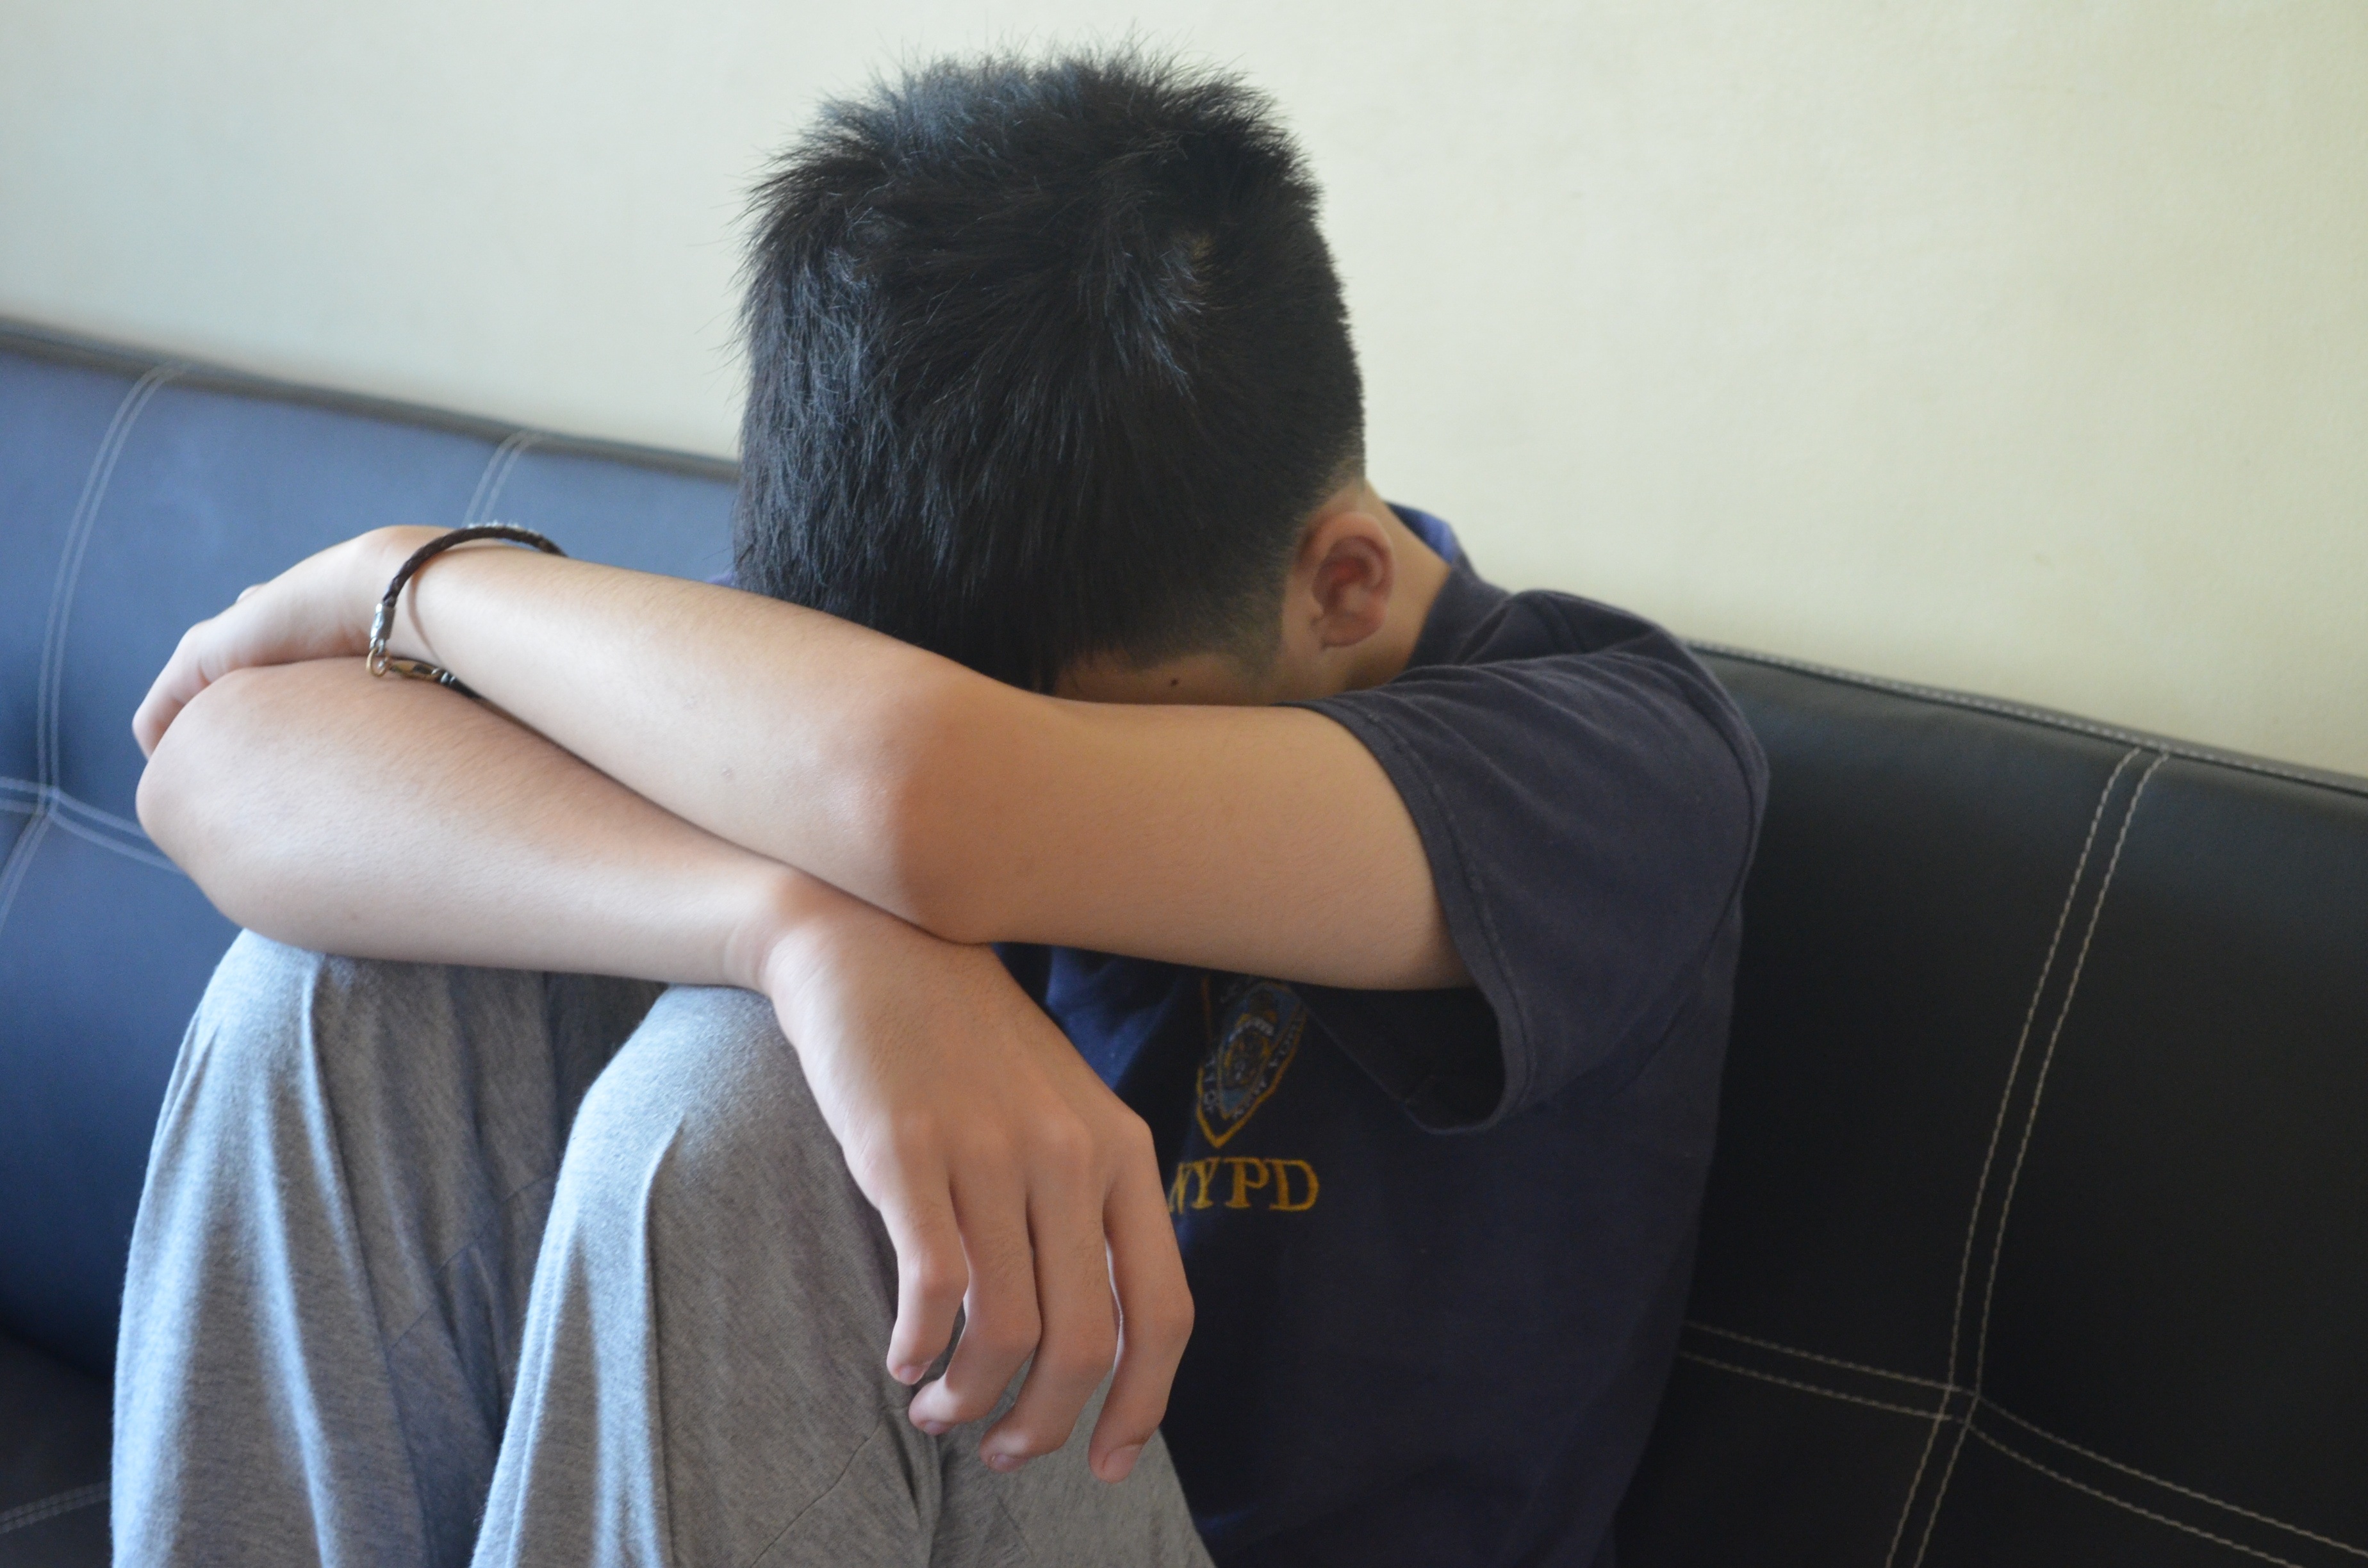 13-year-old boy sexually abused 'by 21 men' on Grindr | PinkNews